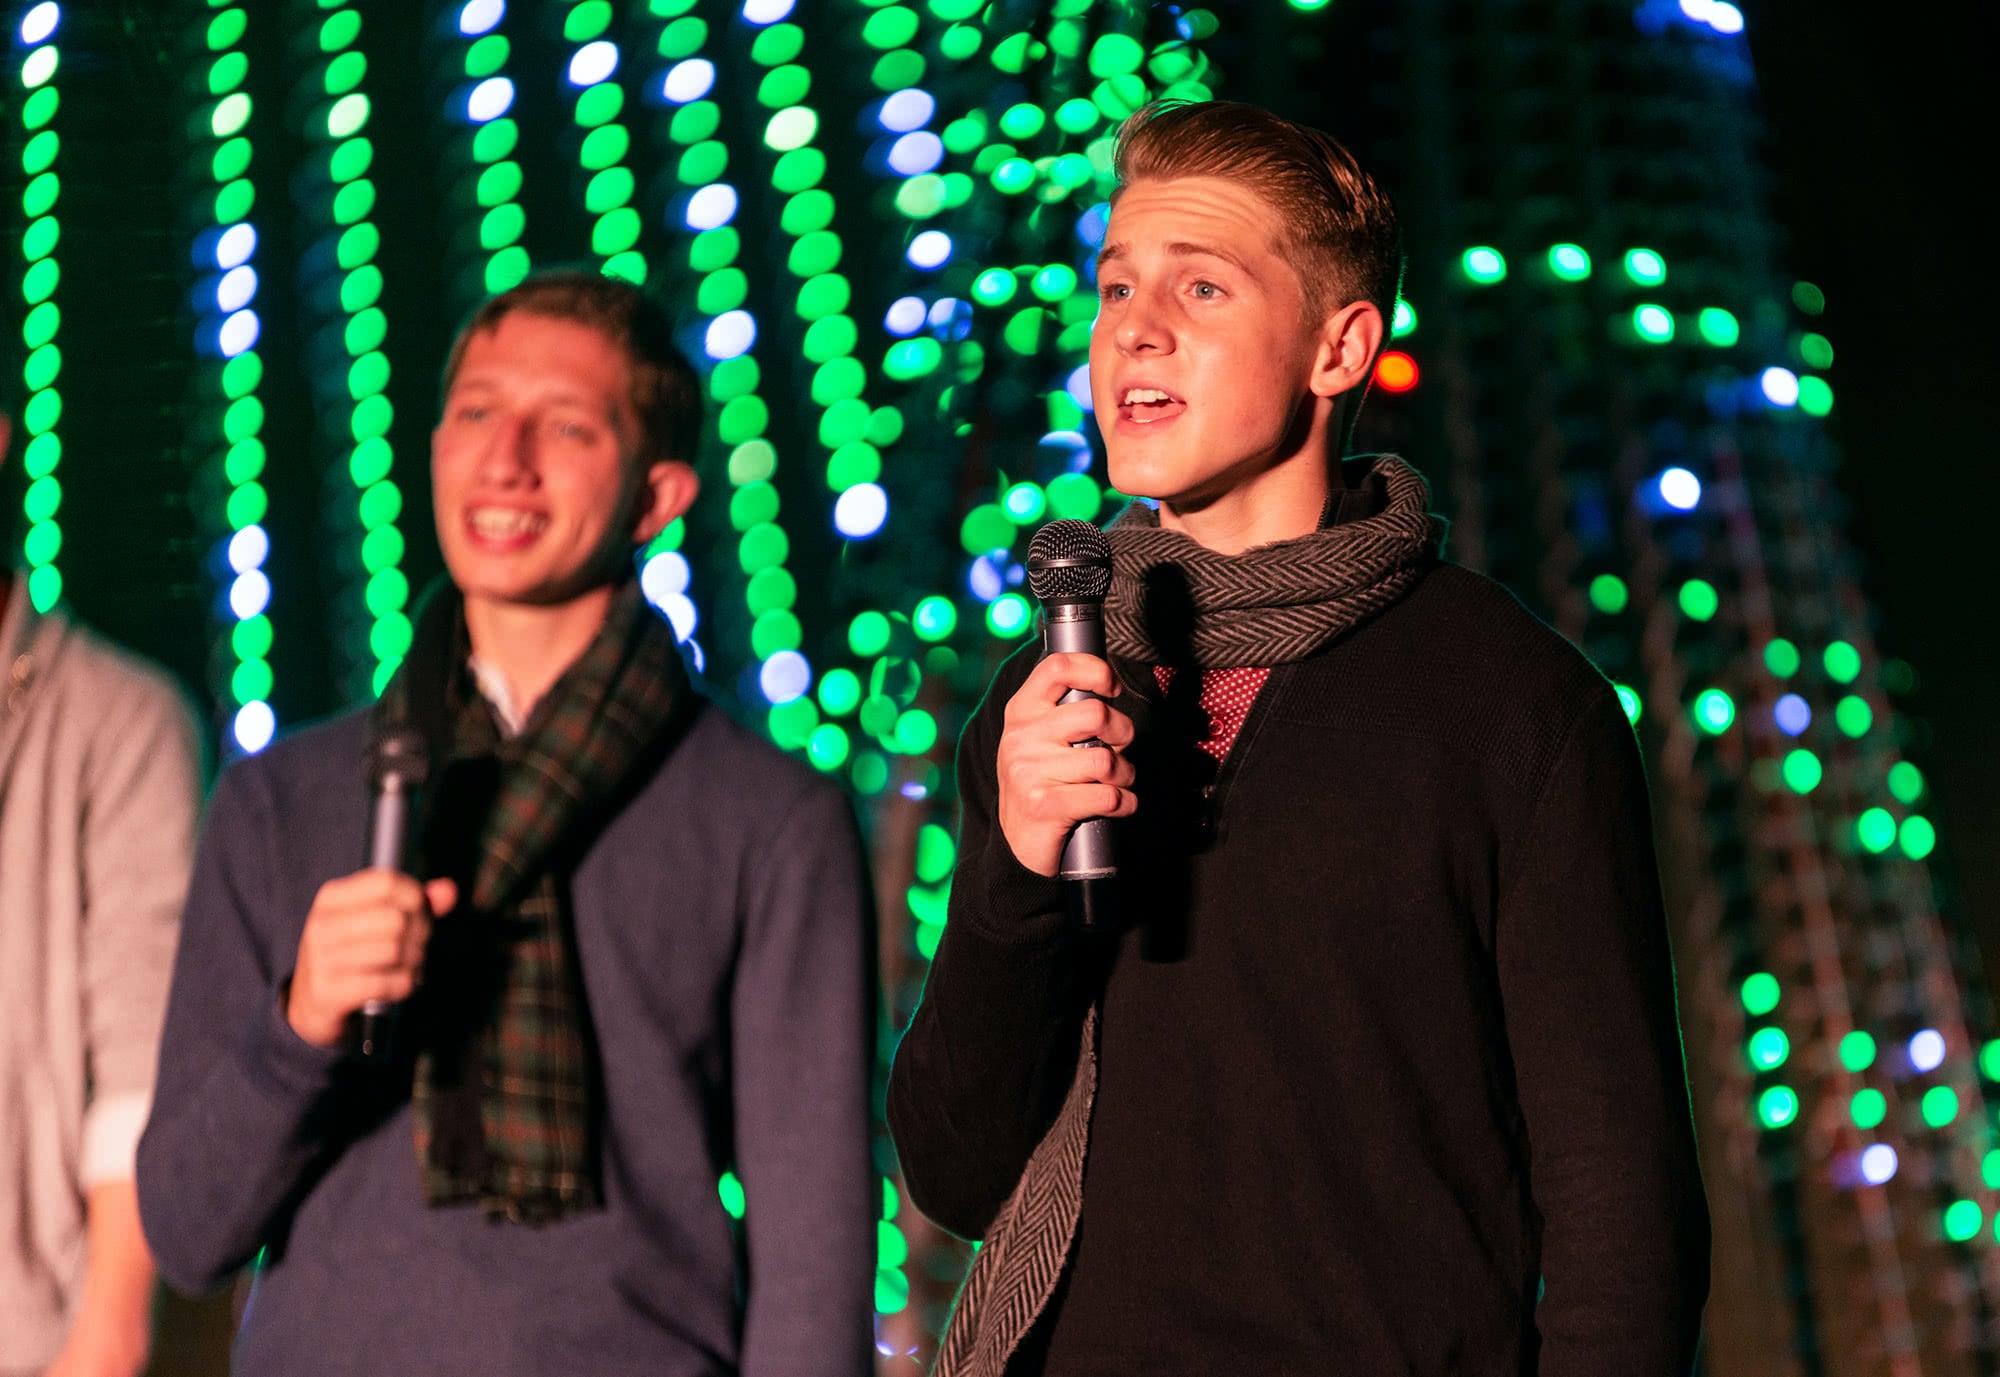 Spirit Singers sing on the Christmas Lights stage